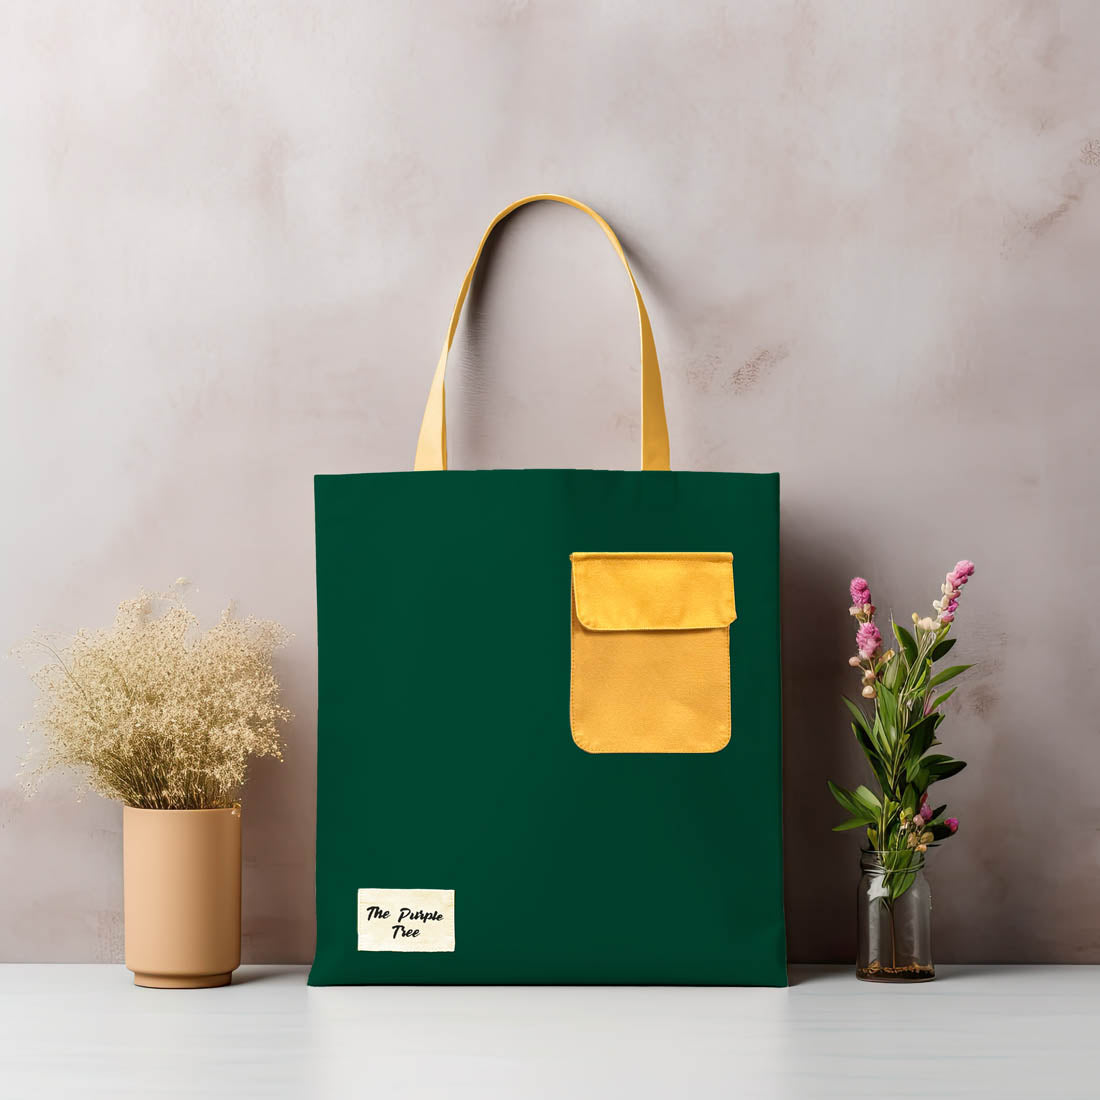 A stylish tote bag with a green and yellow design, featuring a convenient yellow pocket. Perfect for carrying your essentials!